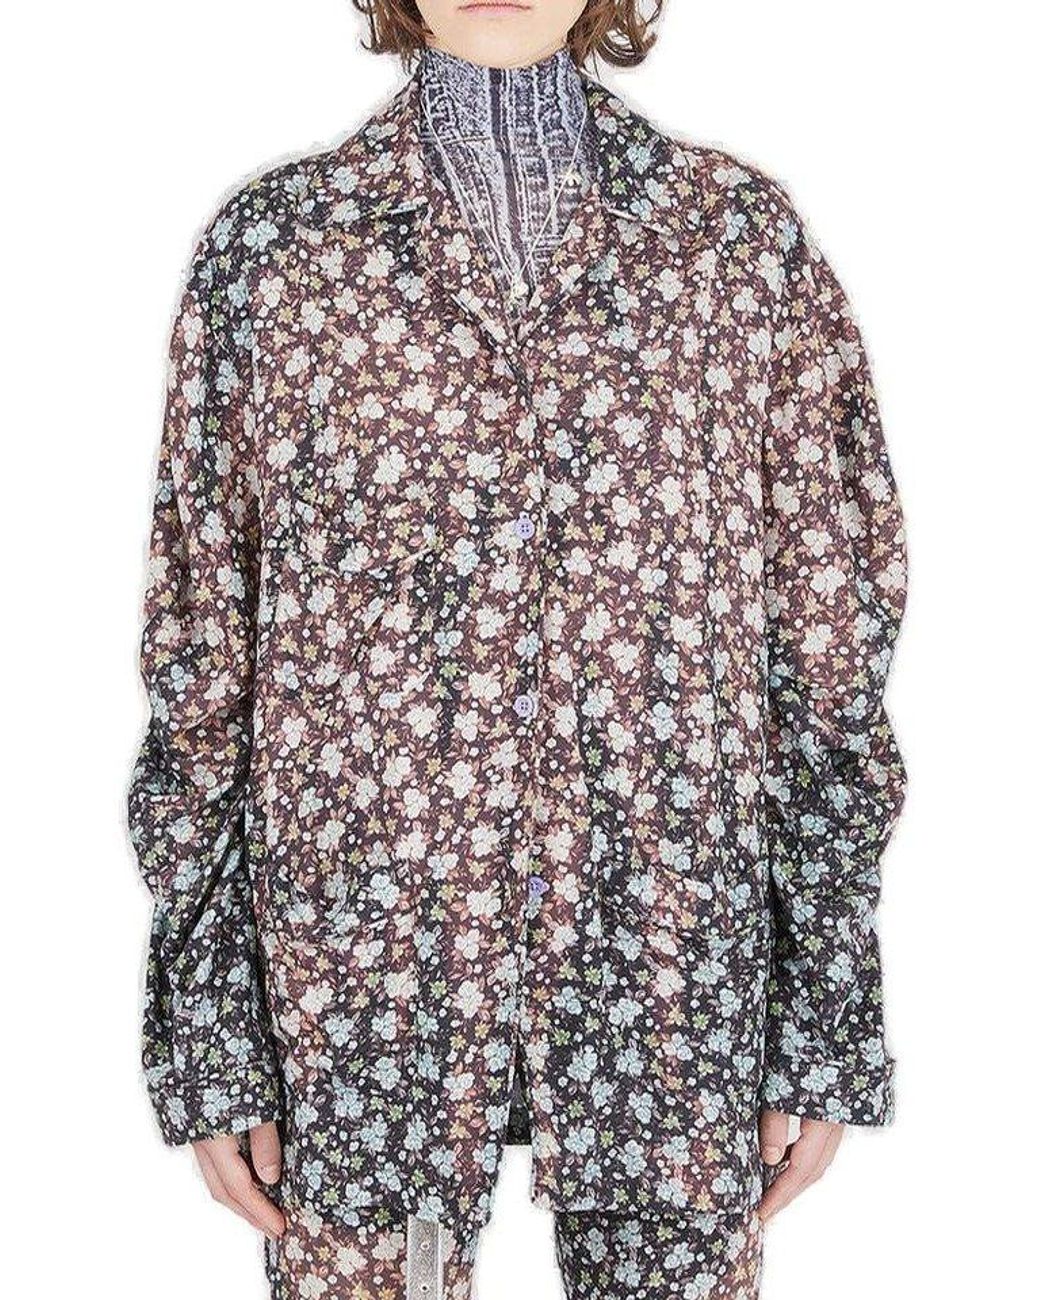 Acne Studios Allover Floral Print Oversized Shirt | Lyst